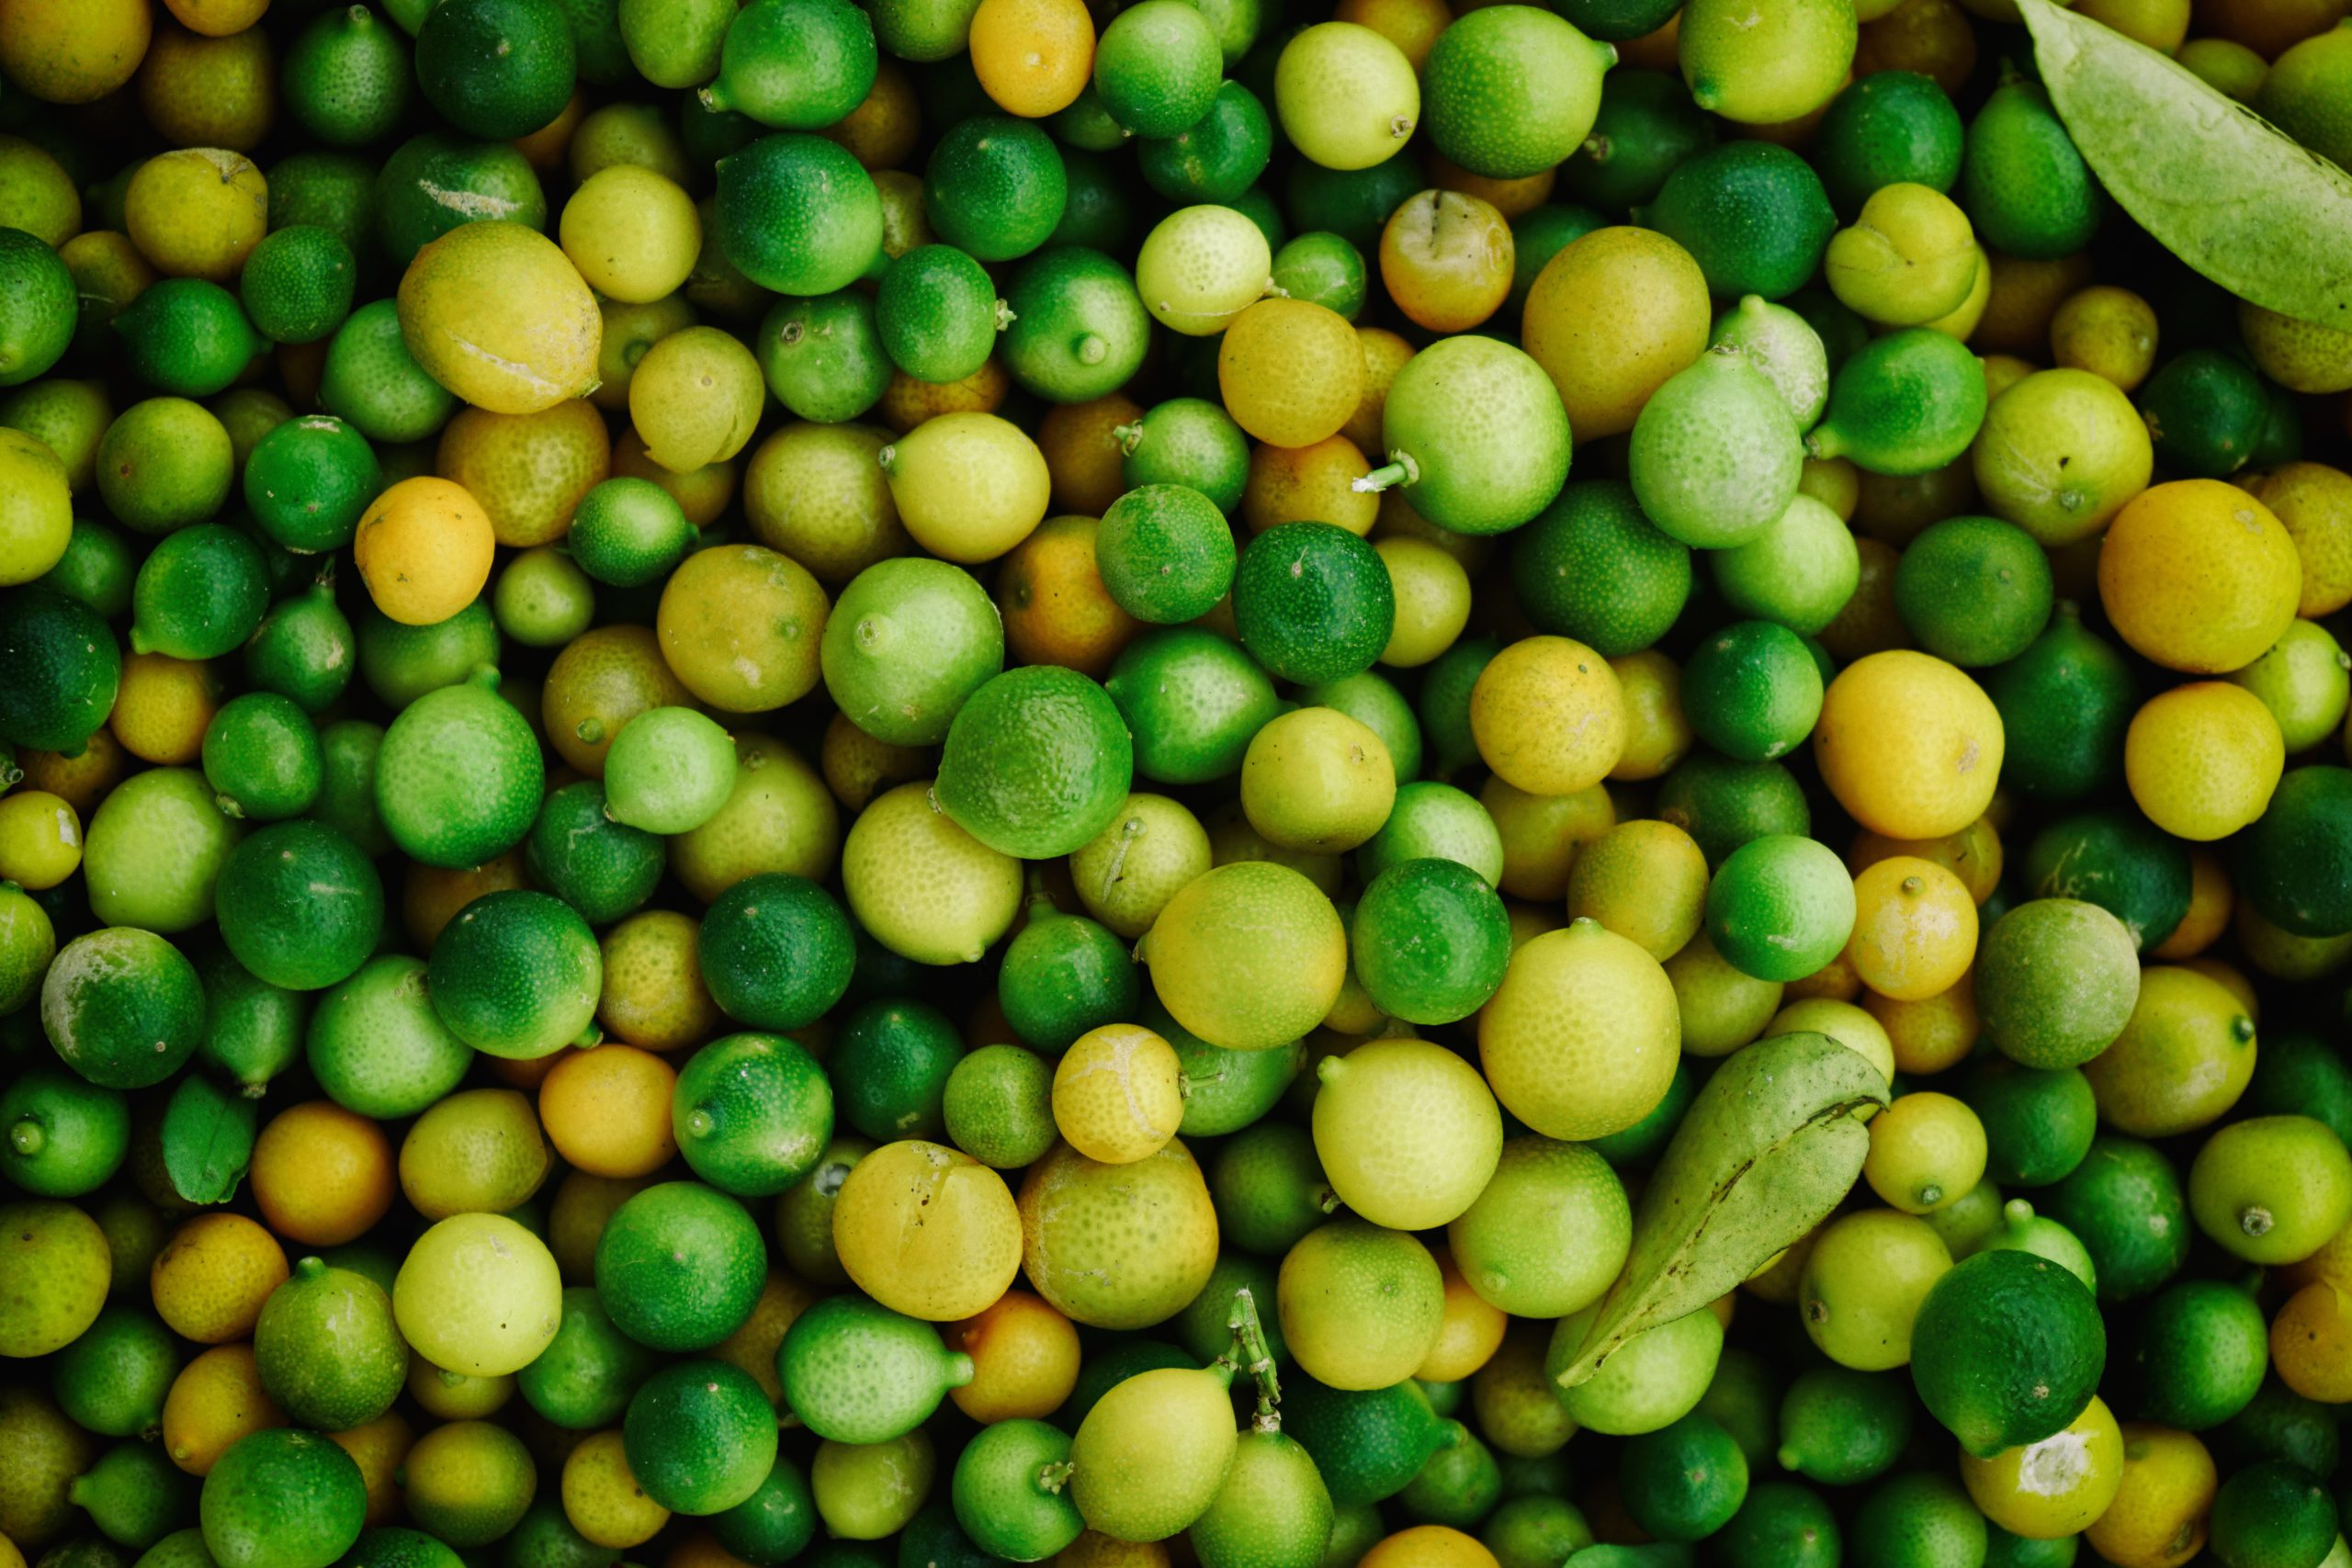 Is PEA Good For Depression?